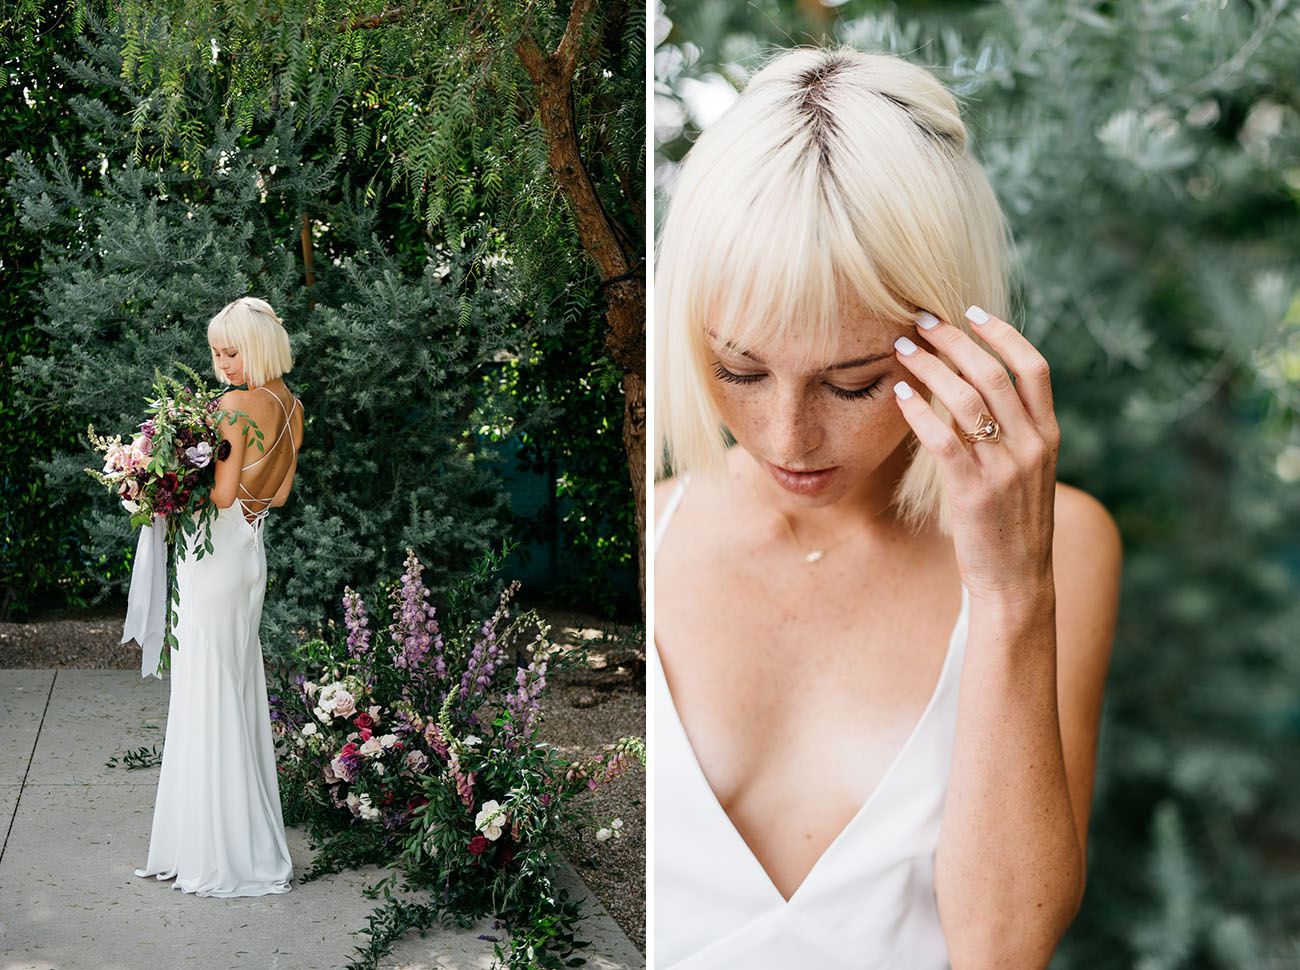 The bride was wearing a plunging neckline wedding dress with a strappy back